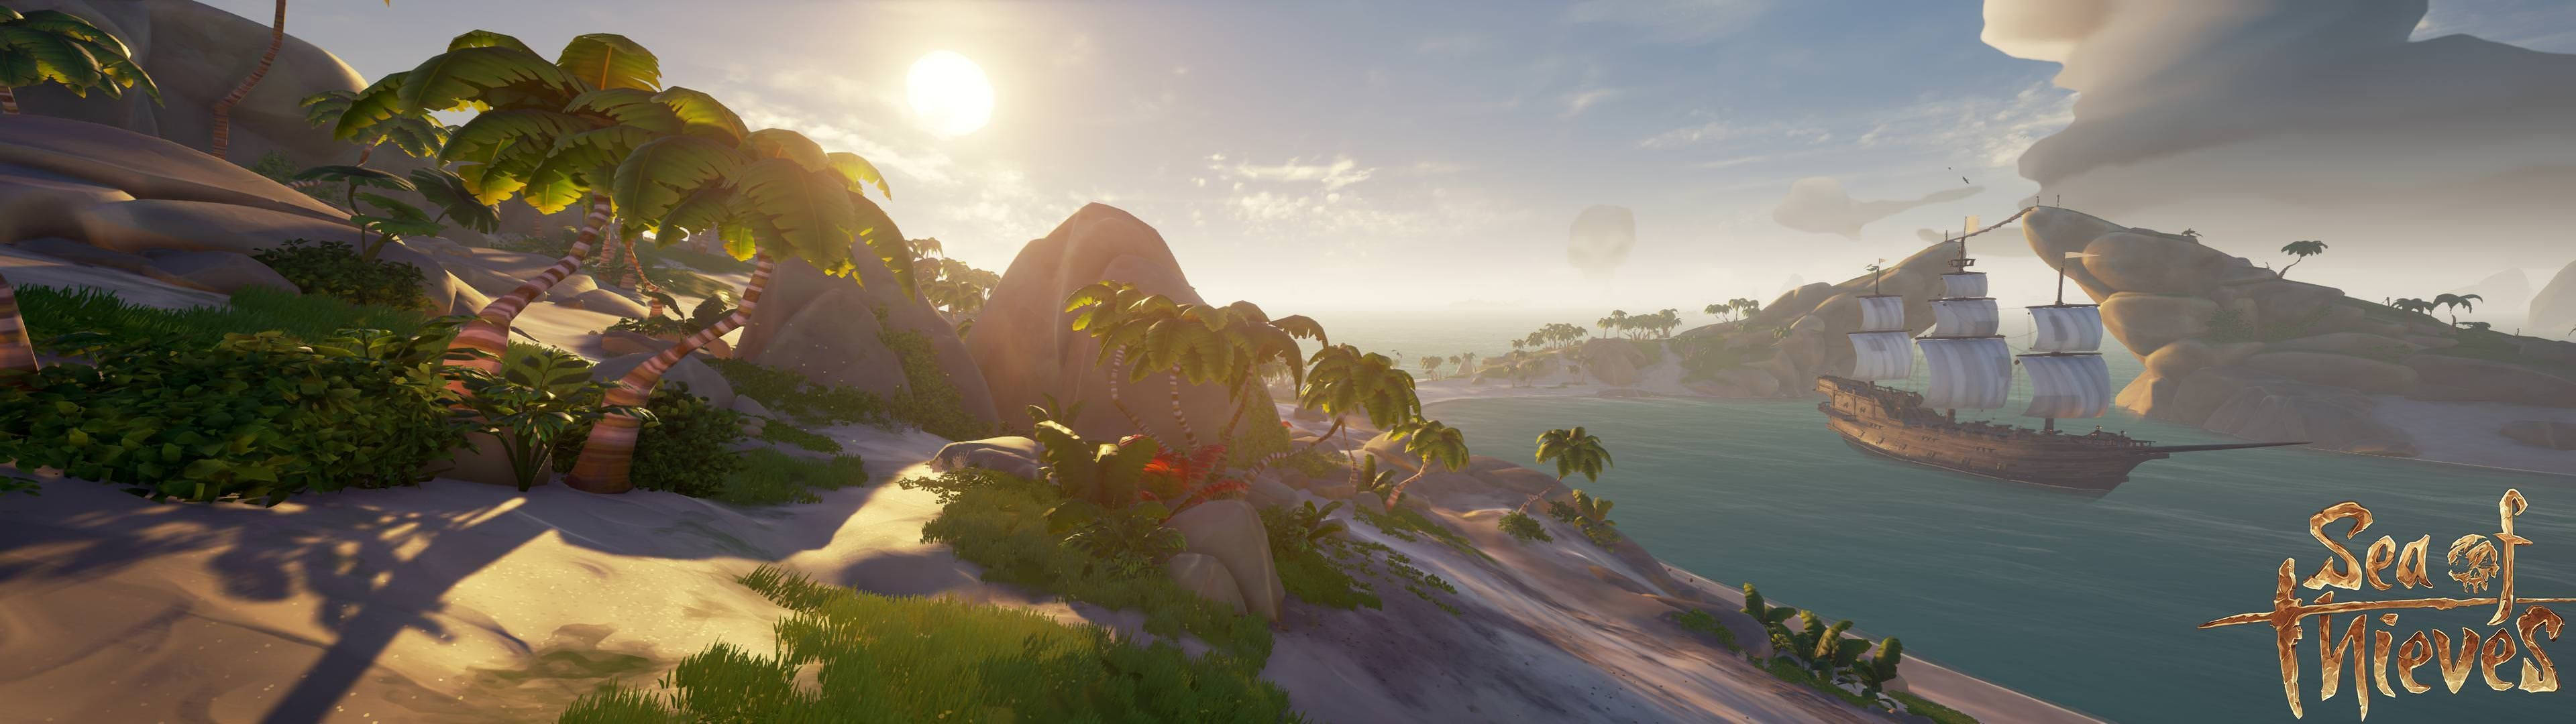 3840X1080 Sea Of Thieves Wallpaper and Background